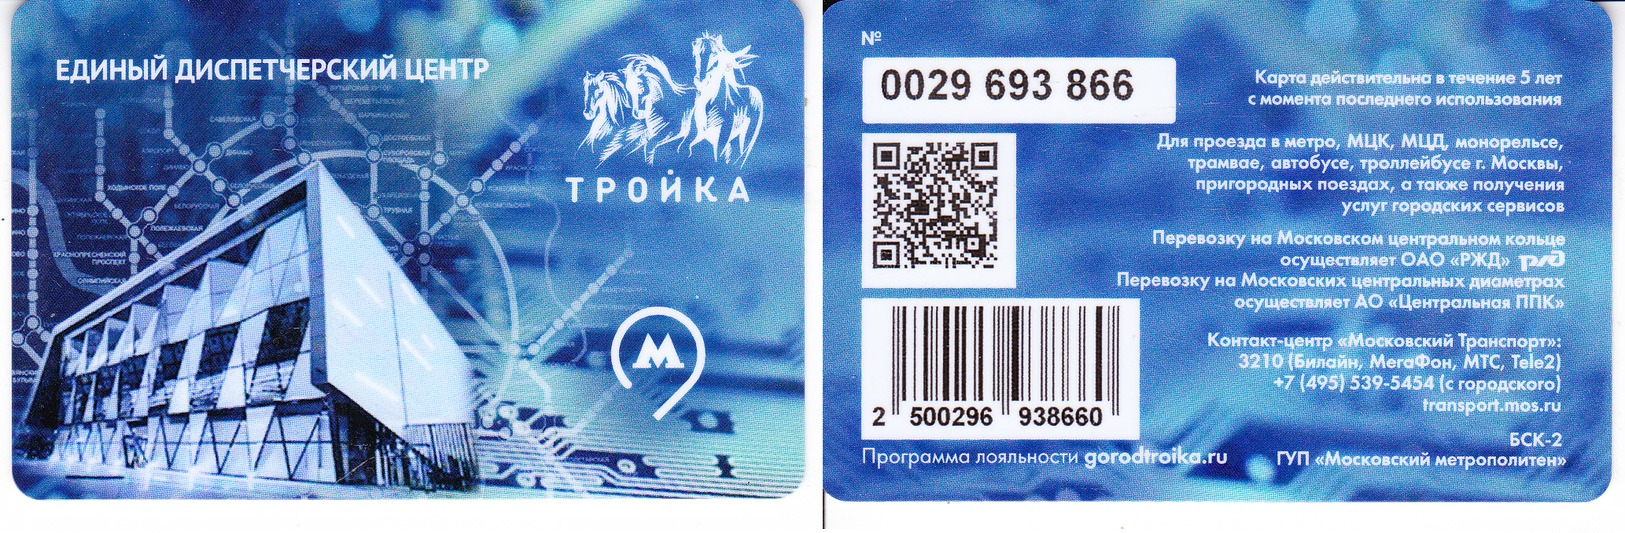 Transport  Card  Russia. Moscow  Metro/train/trolleybus/bus Troika  02.2020 New - Russia